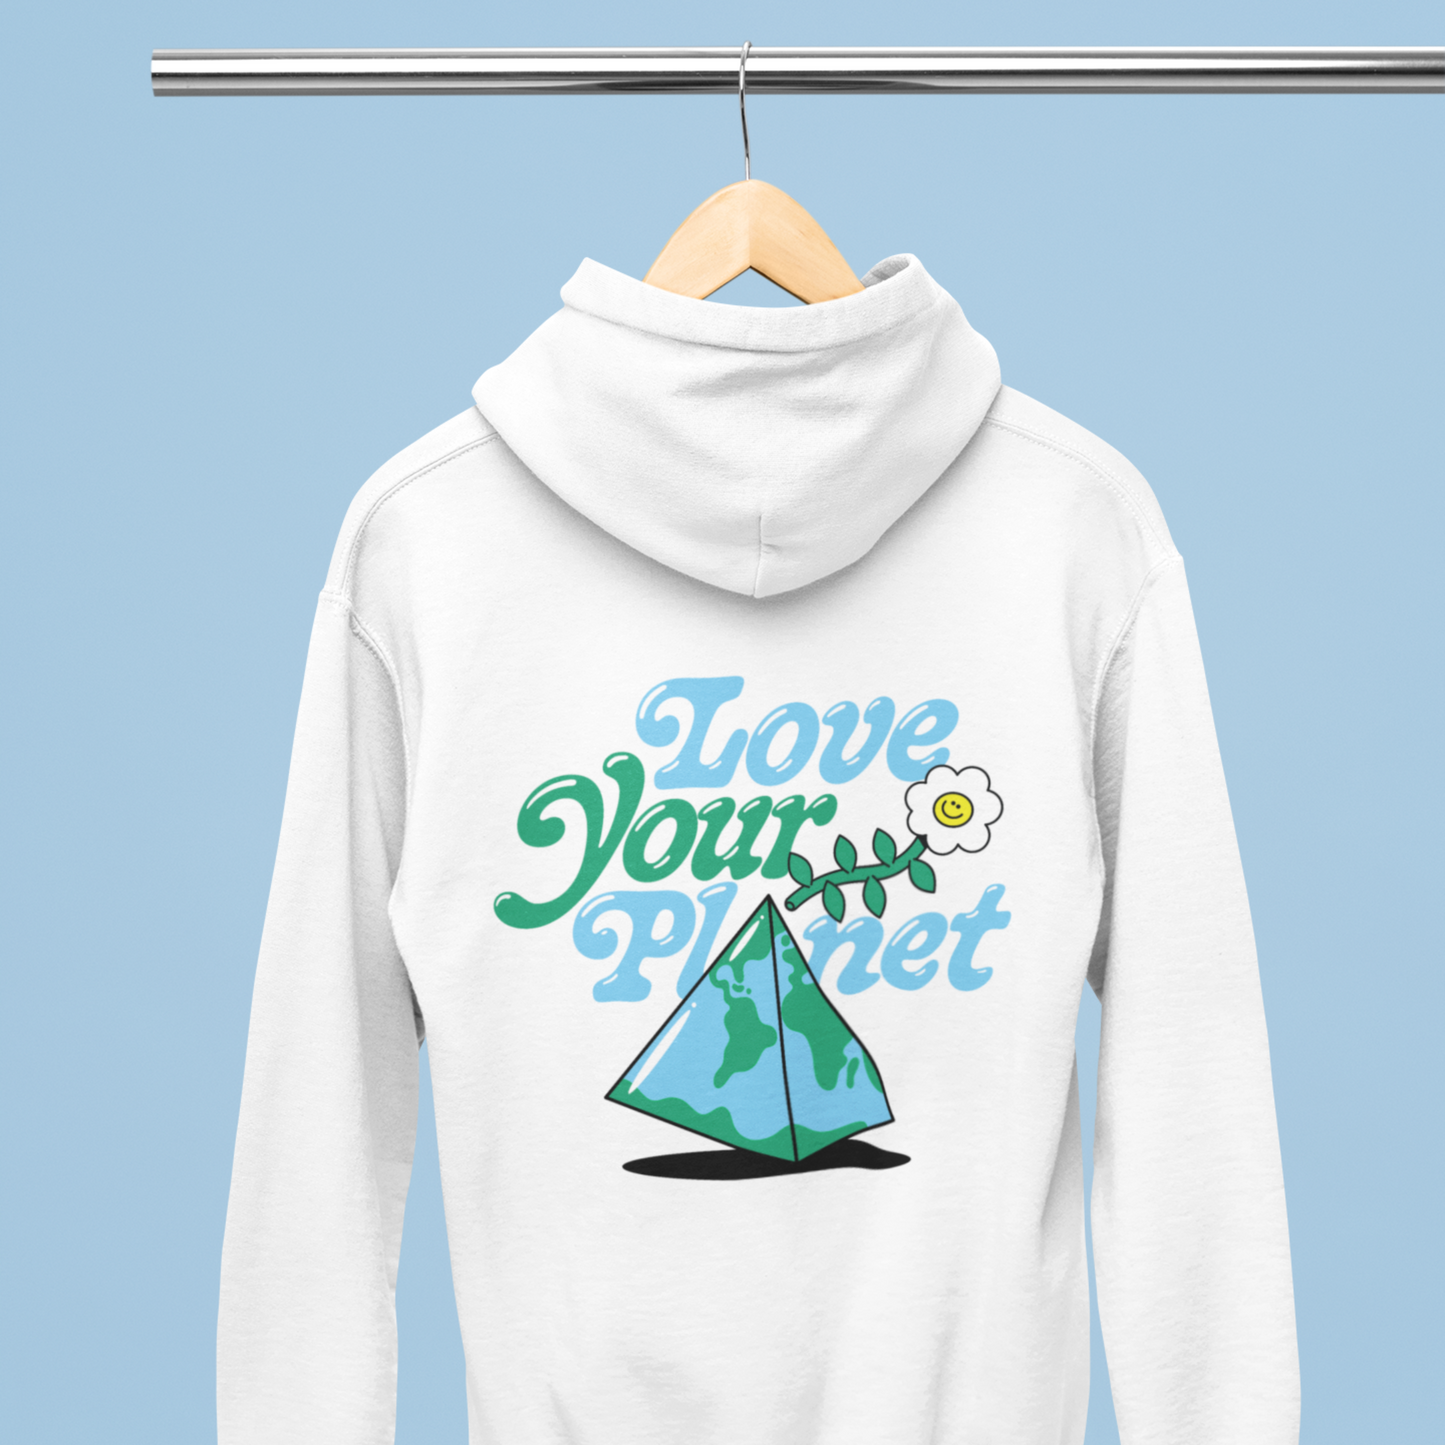 Love Your Planet - White Hoodie